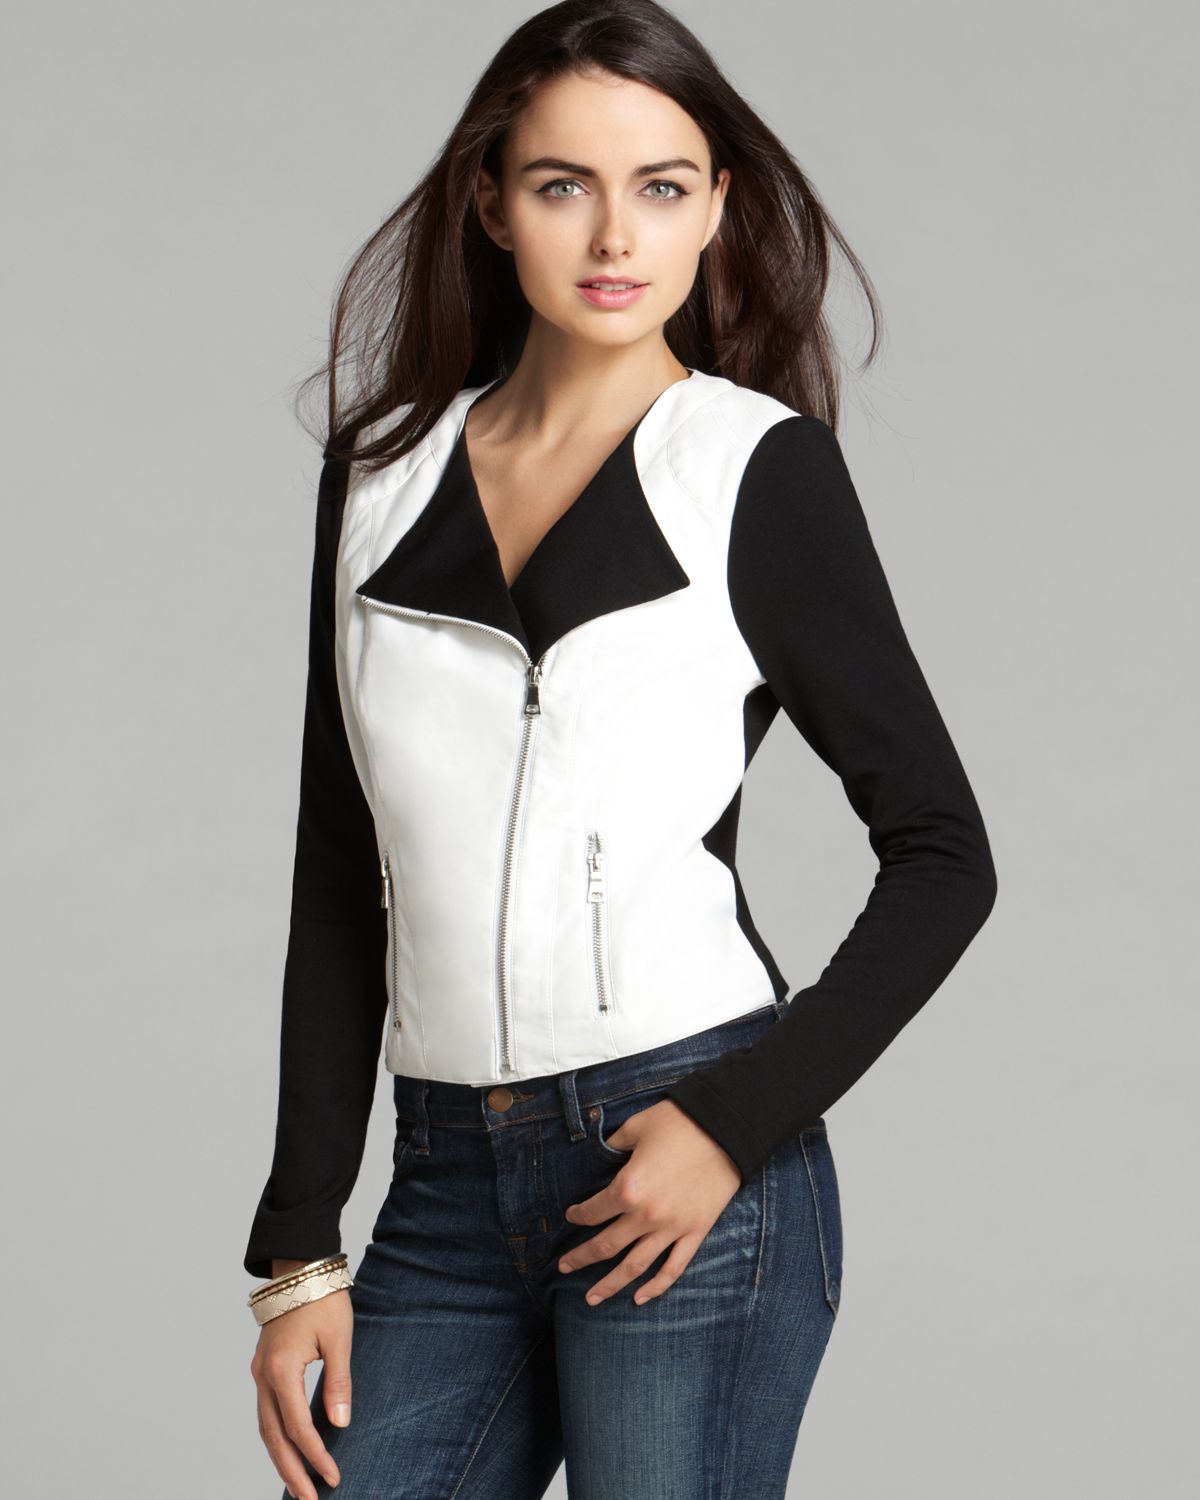 black and white guess jacket